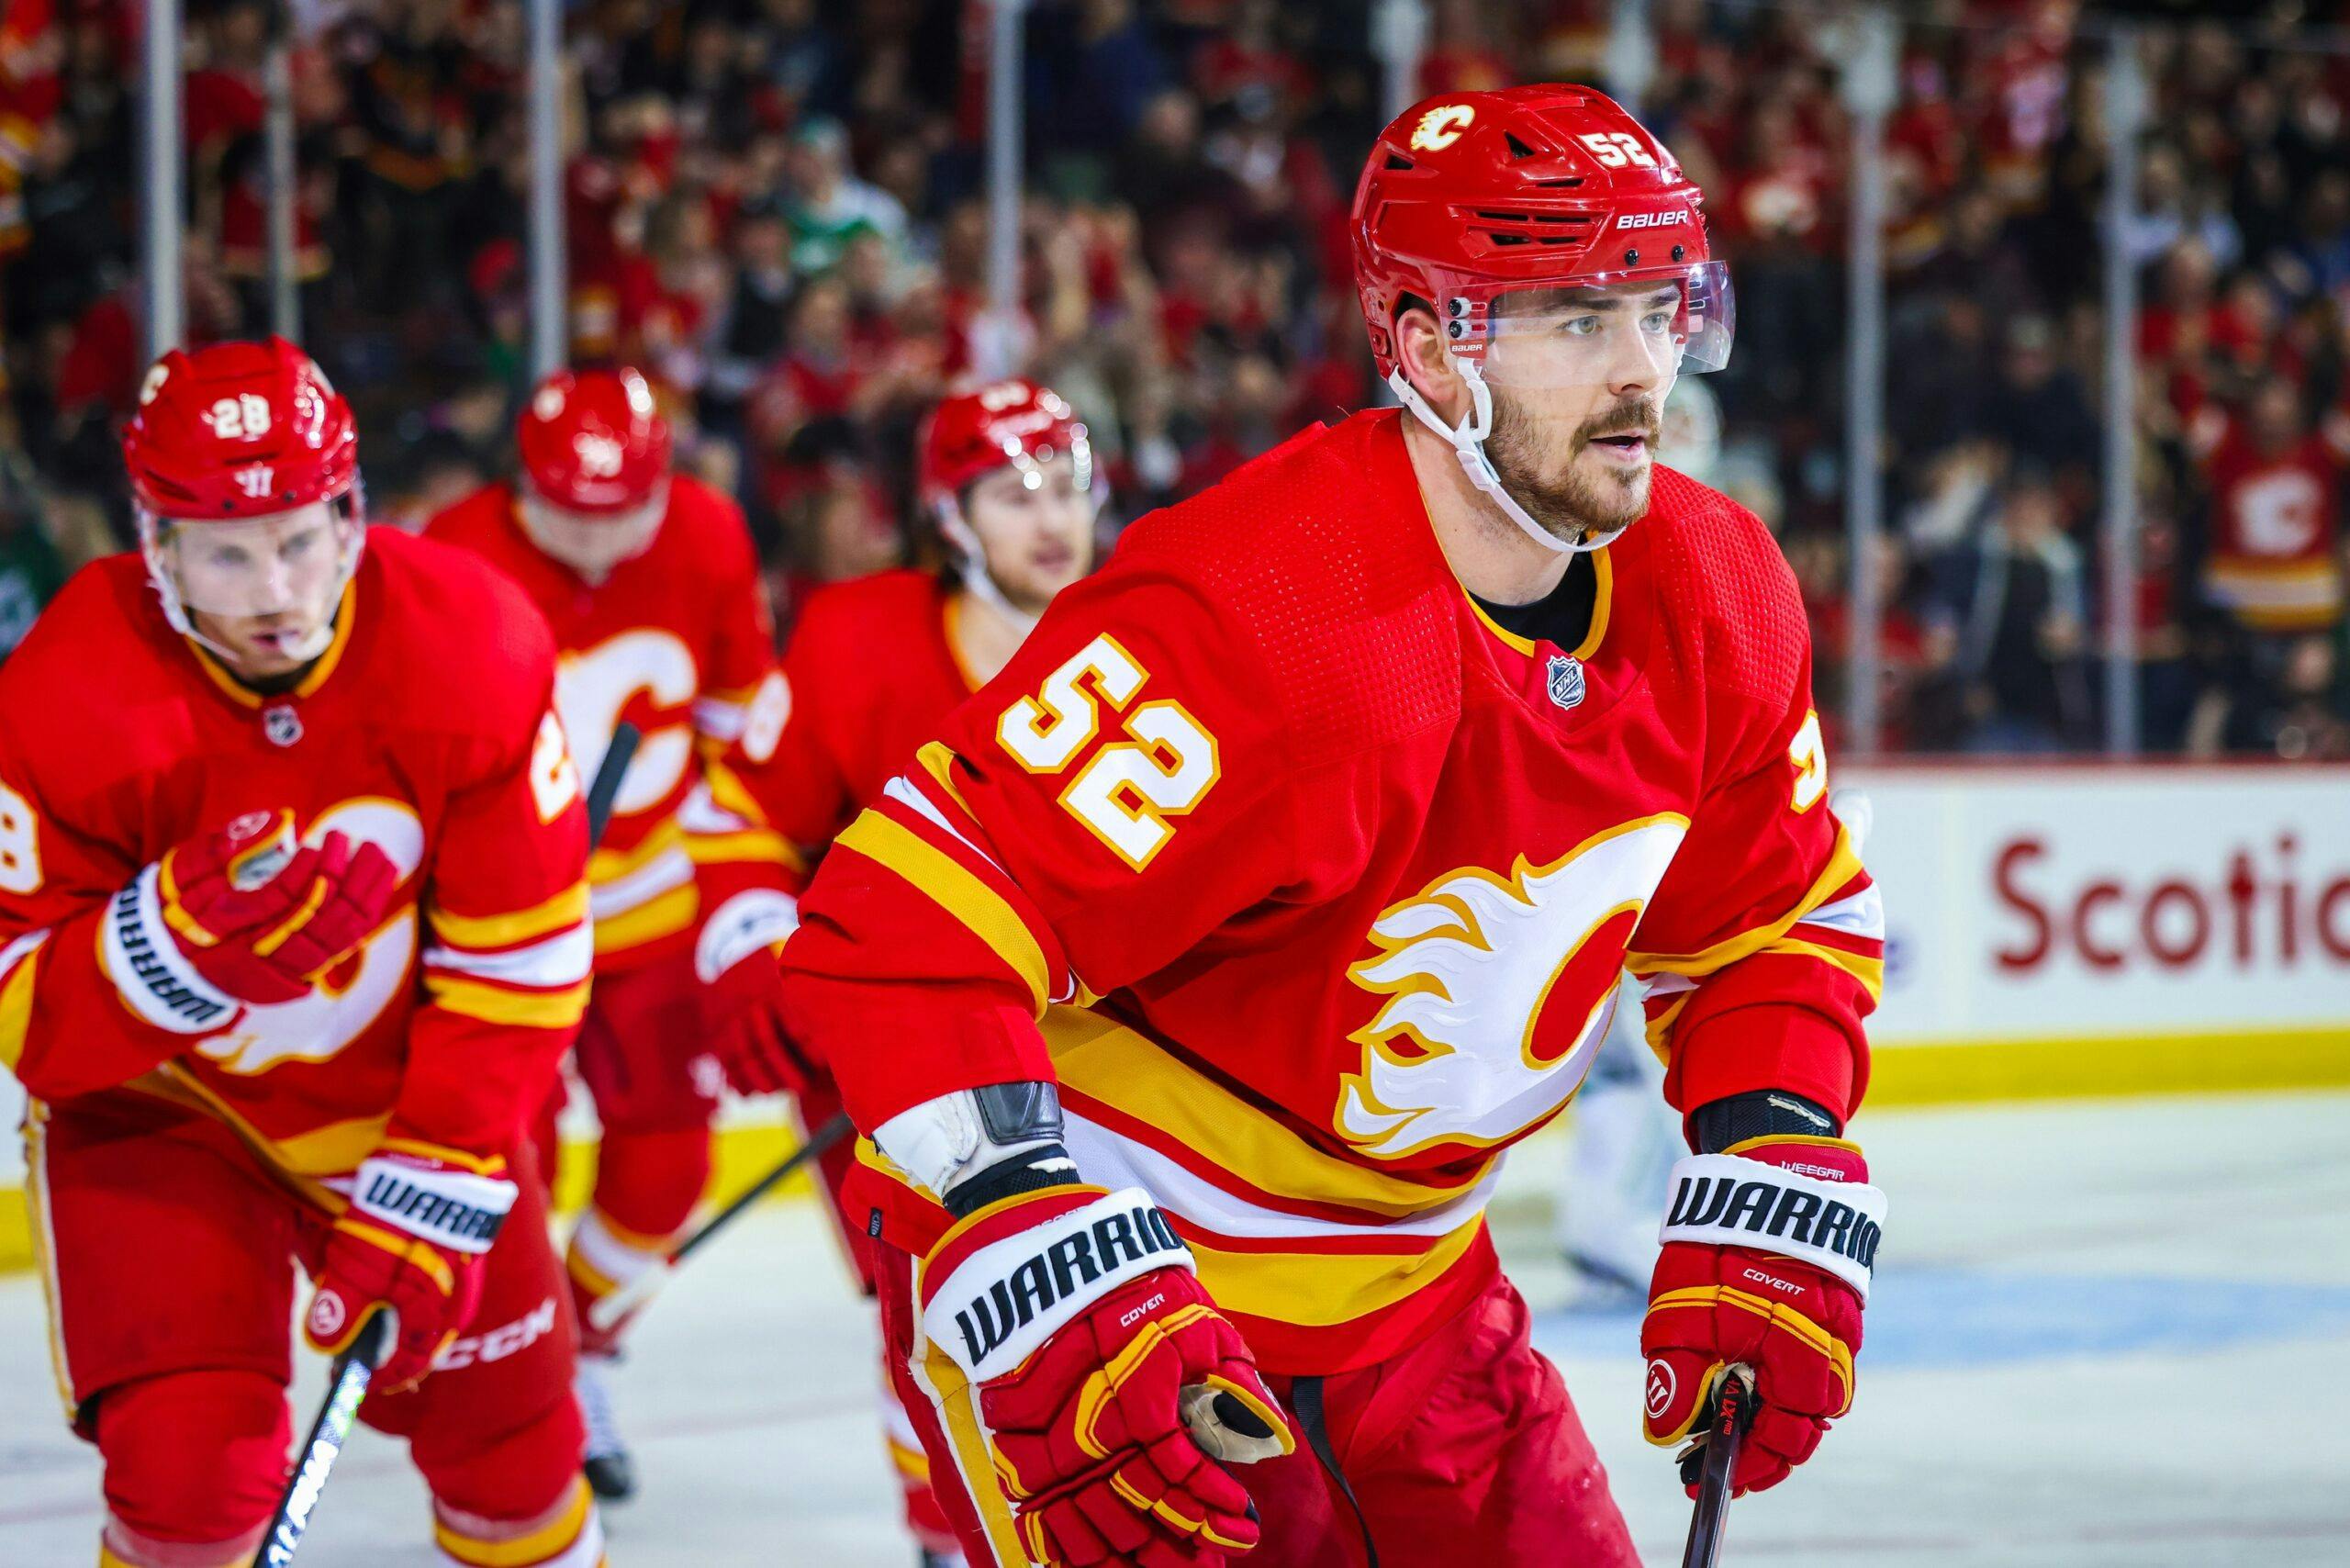 Flames center Mikael Backlund signs 2-year extension, named captain